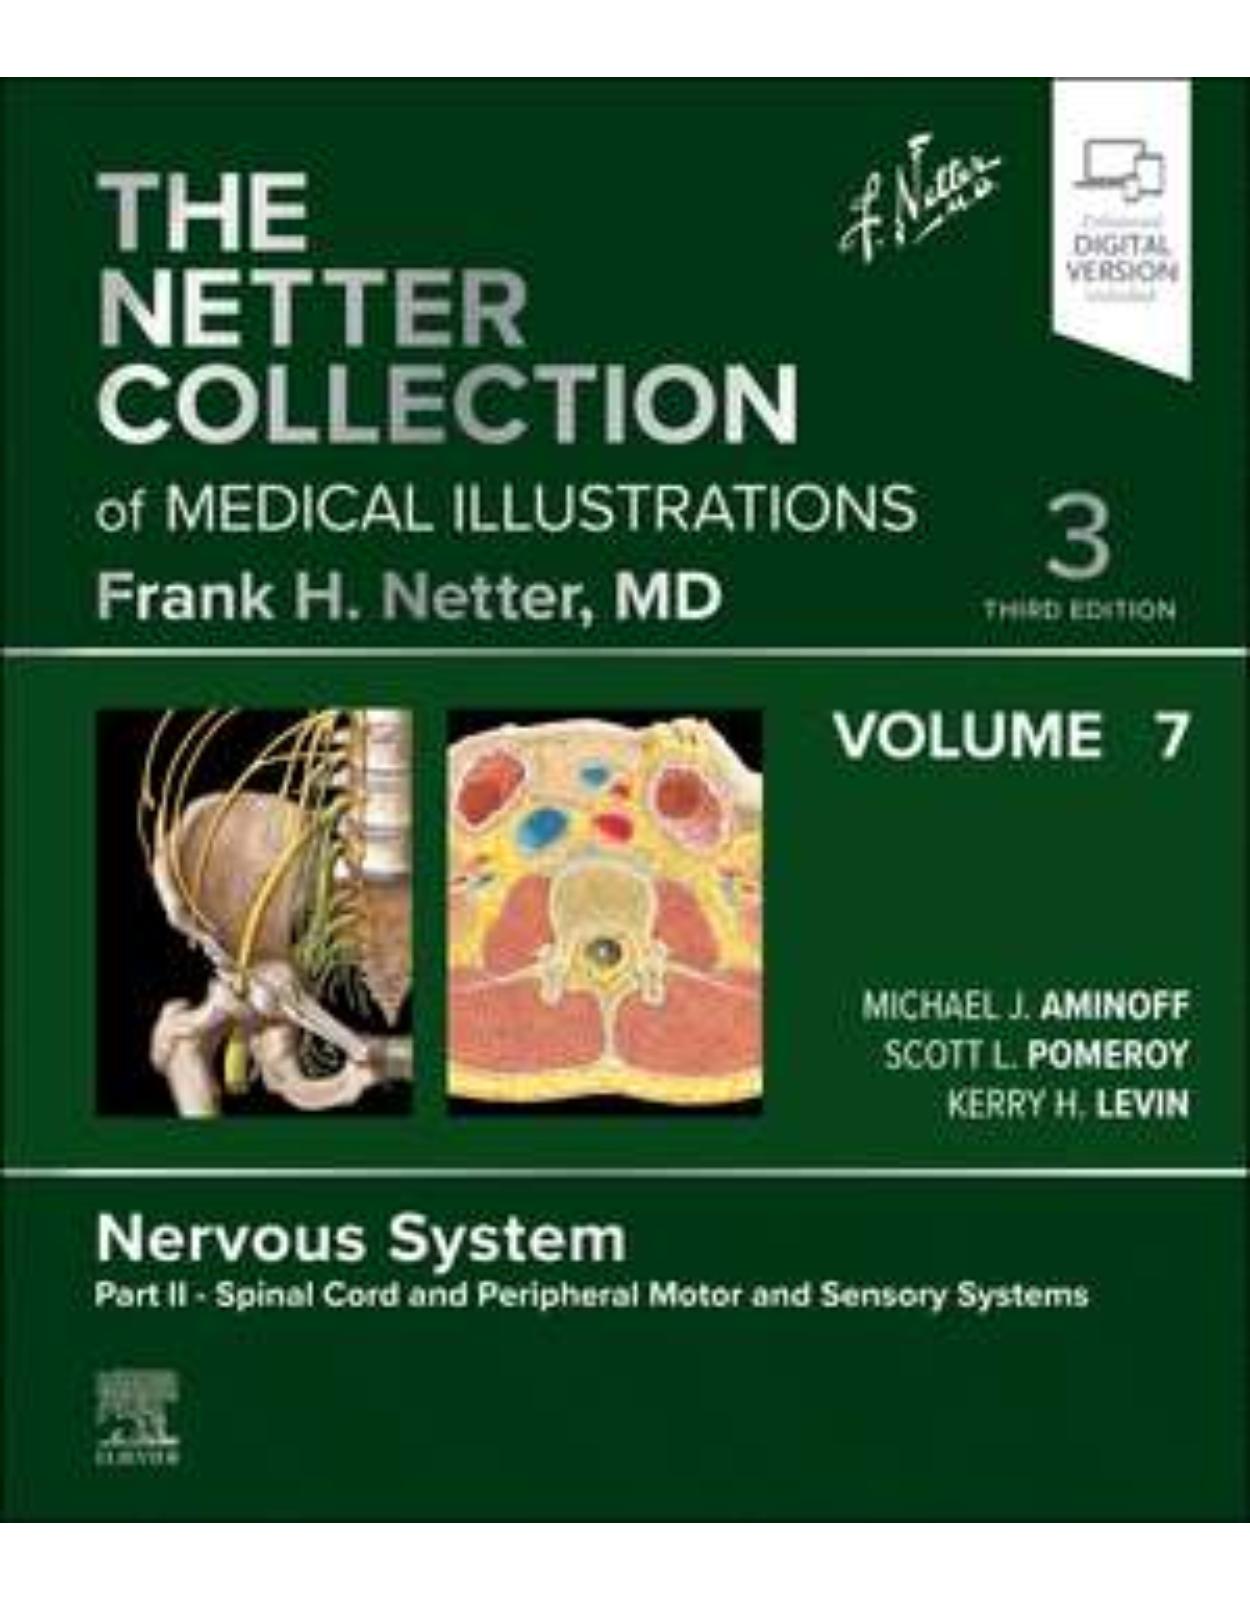 The Netter Collection of Medical Illustrations: Nervous System, Volume 7, Part II - Spinal Cord and Peripheral Motor and Sensory Systems, 3rd Edition